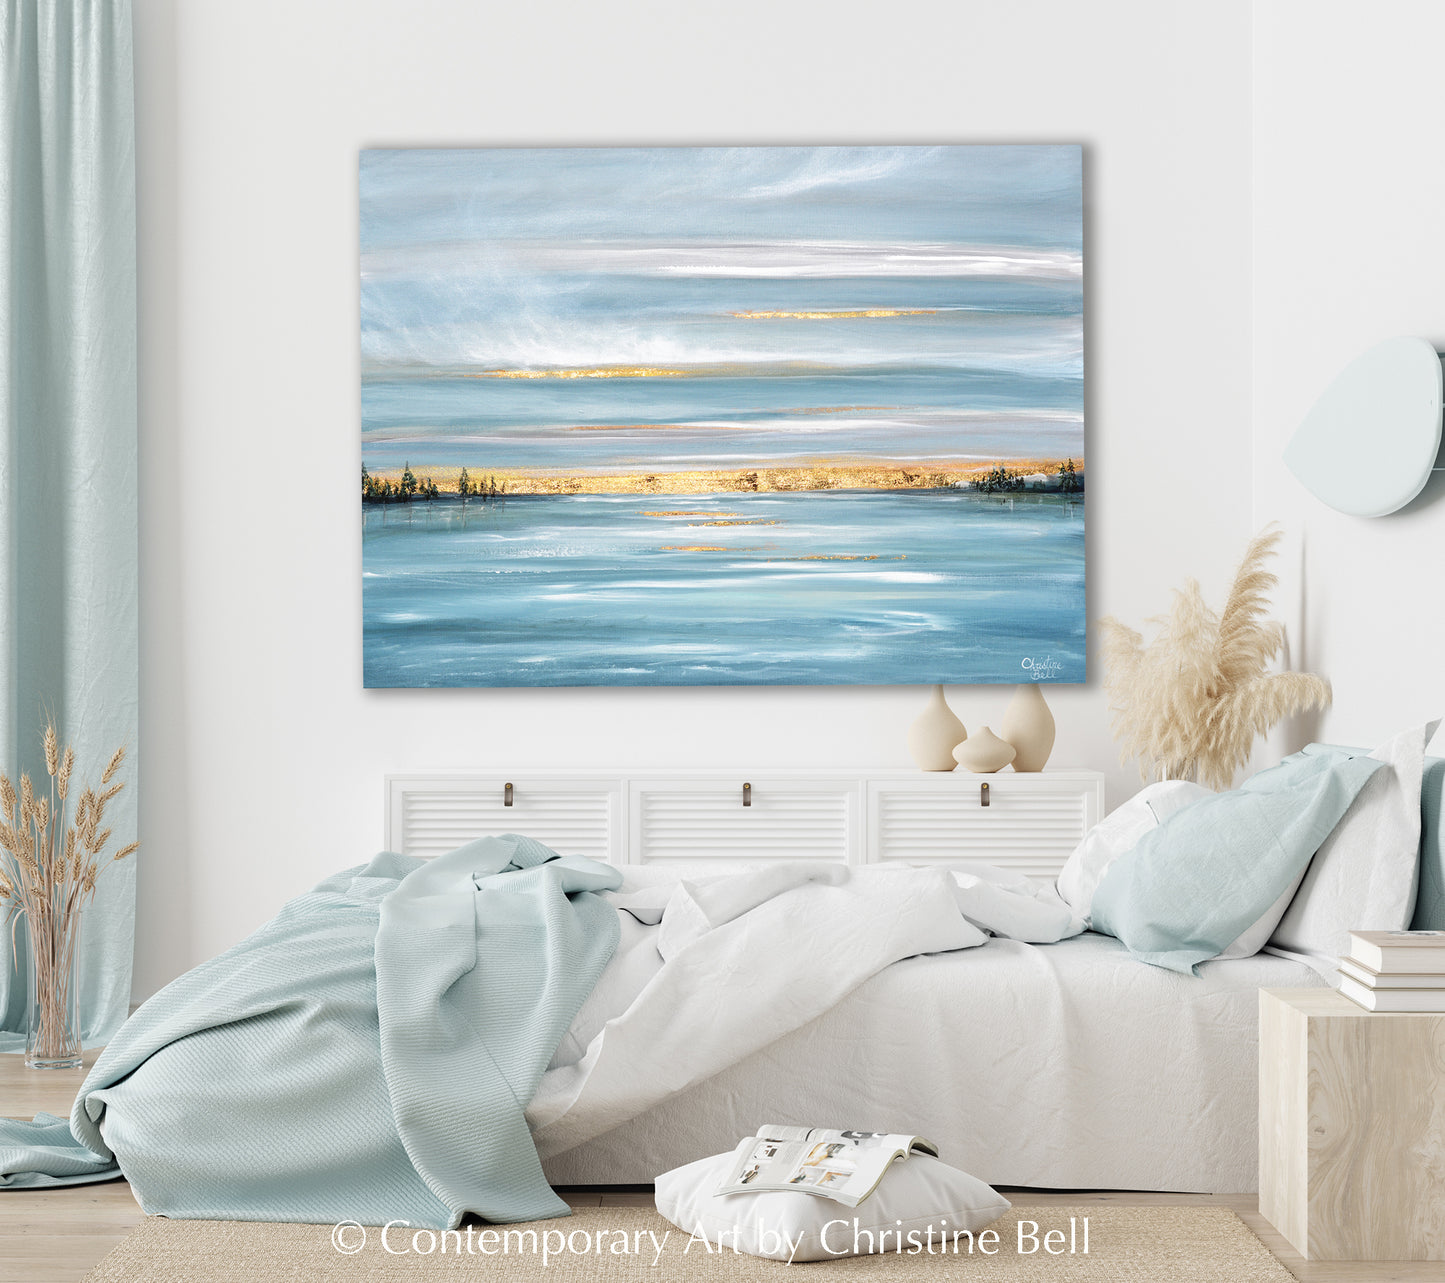 "In the Stillness Light is Found" ORIGINAL Painting, Seascape Landscape with Gold Leaf, 40x30"